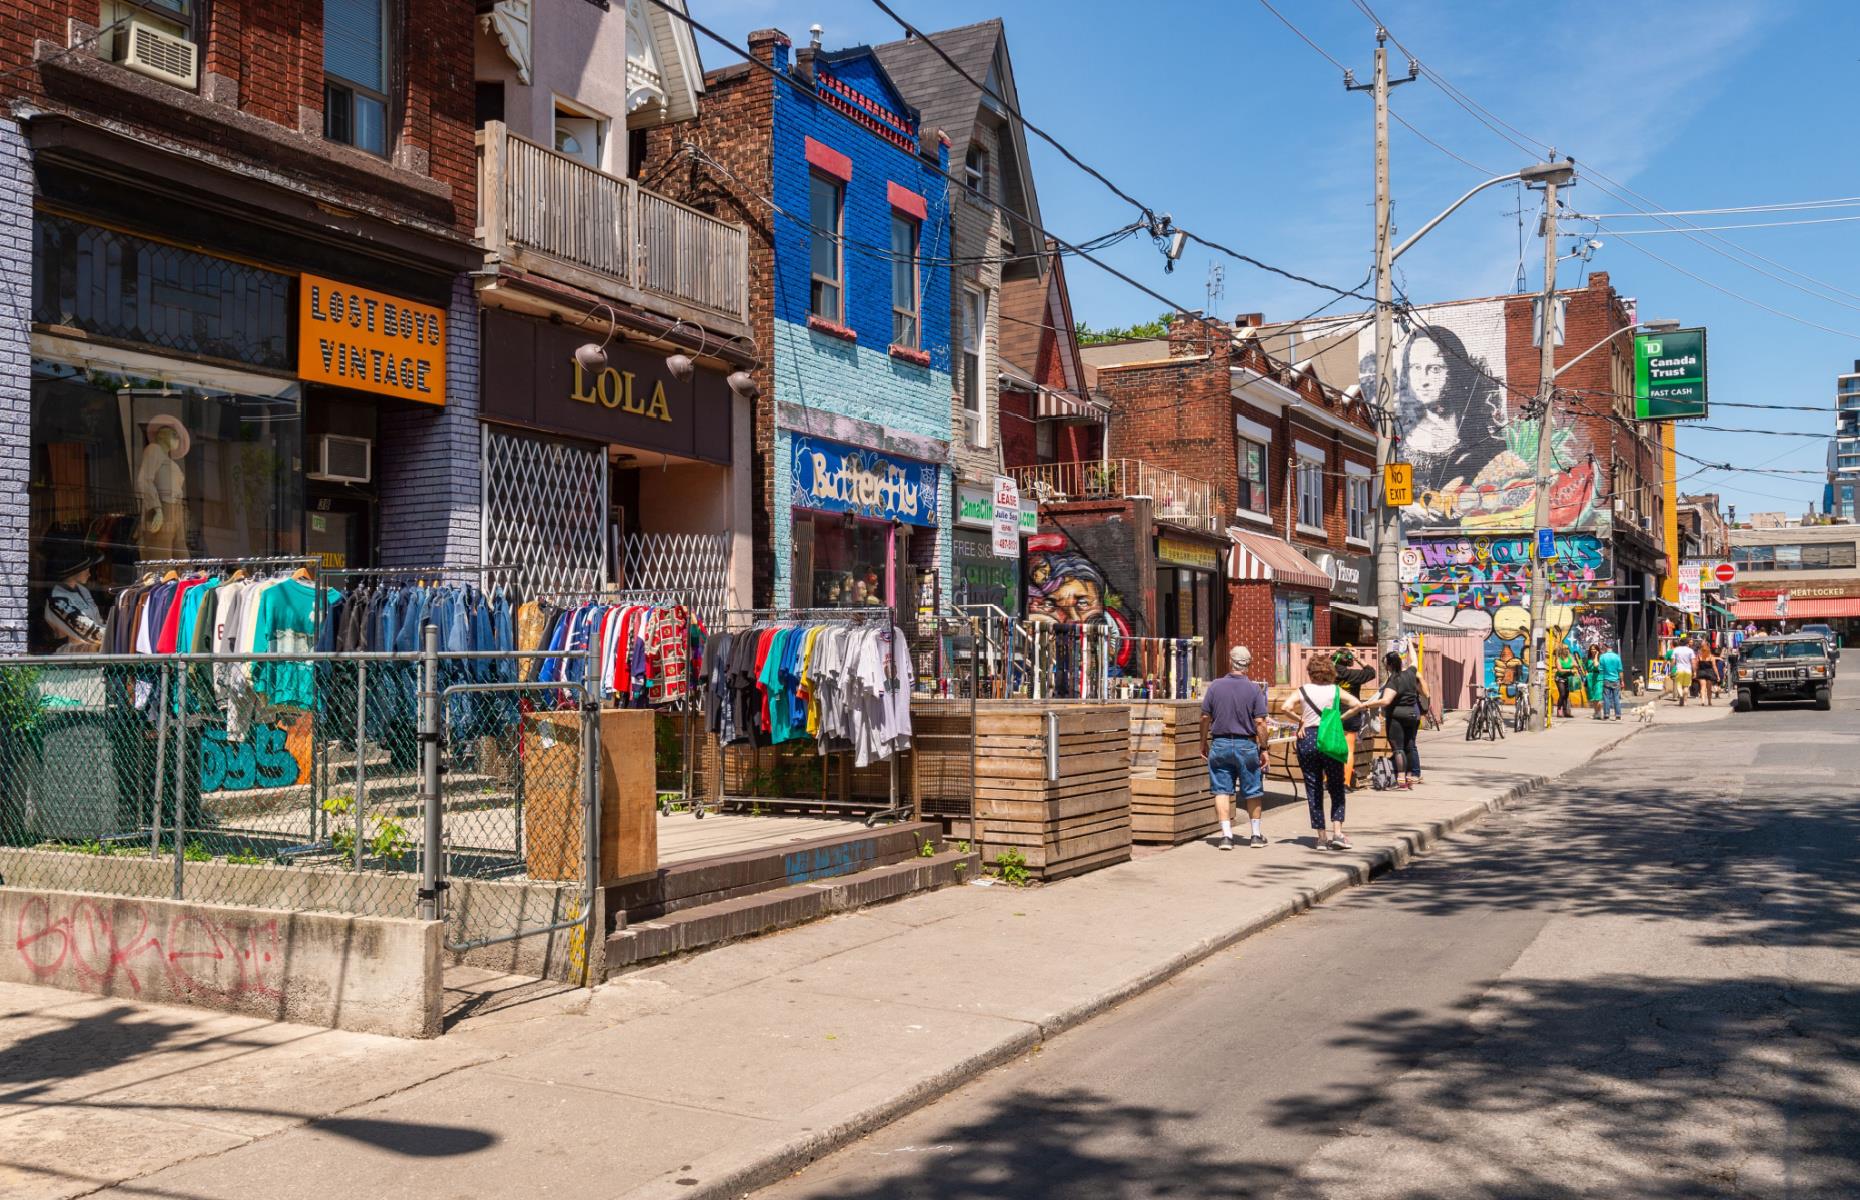 <p>A delightfully eclectic collection of shops, eateries and Victorian houses converted into apartments, <a href="http://www.kensington-market.ca">Kensington Market</a> is the heart of old-school bohemian <a href="https://www.loveexploring.com/guides/75296/explore-toronto-the-top-things-to-do-where-to-stay-what-to-eat">Toronto</a>. Locals and tourists alike flock to its open air stalls for groceries and vintage clothes, or for world-class people watching over a coffee and casual bite to eat. The area has an artsy, hippie vibe and is packed with treasures to uncover and unique characters to meet.</p>